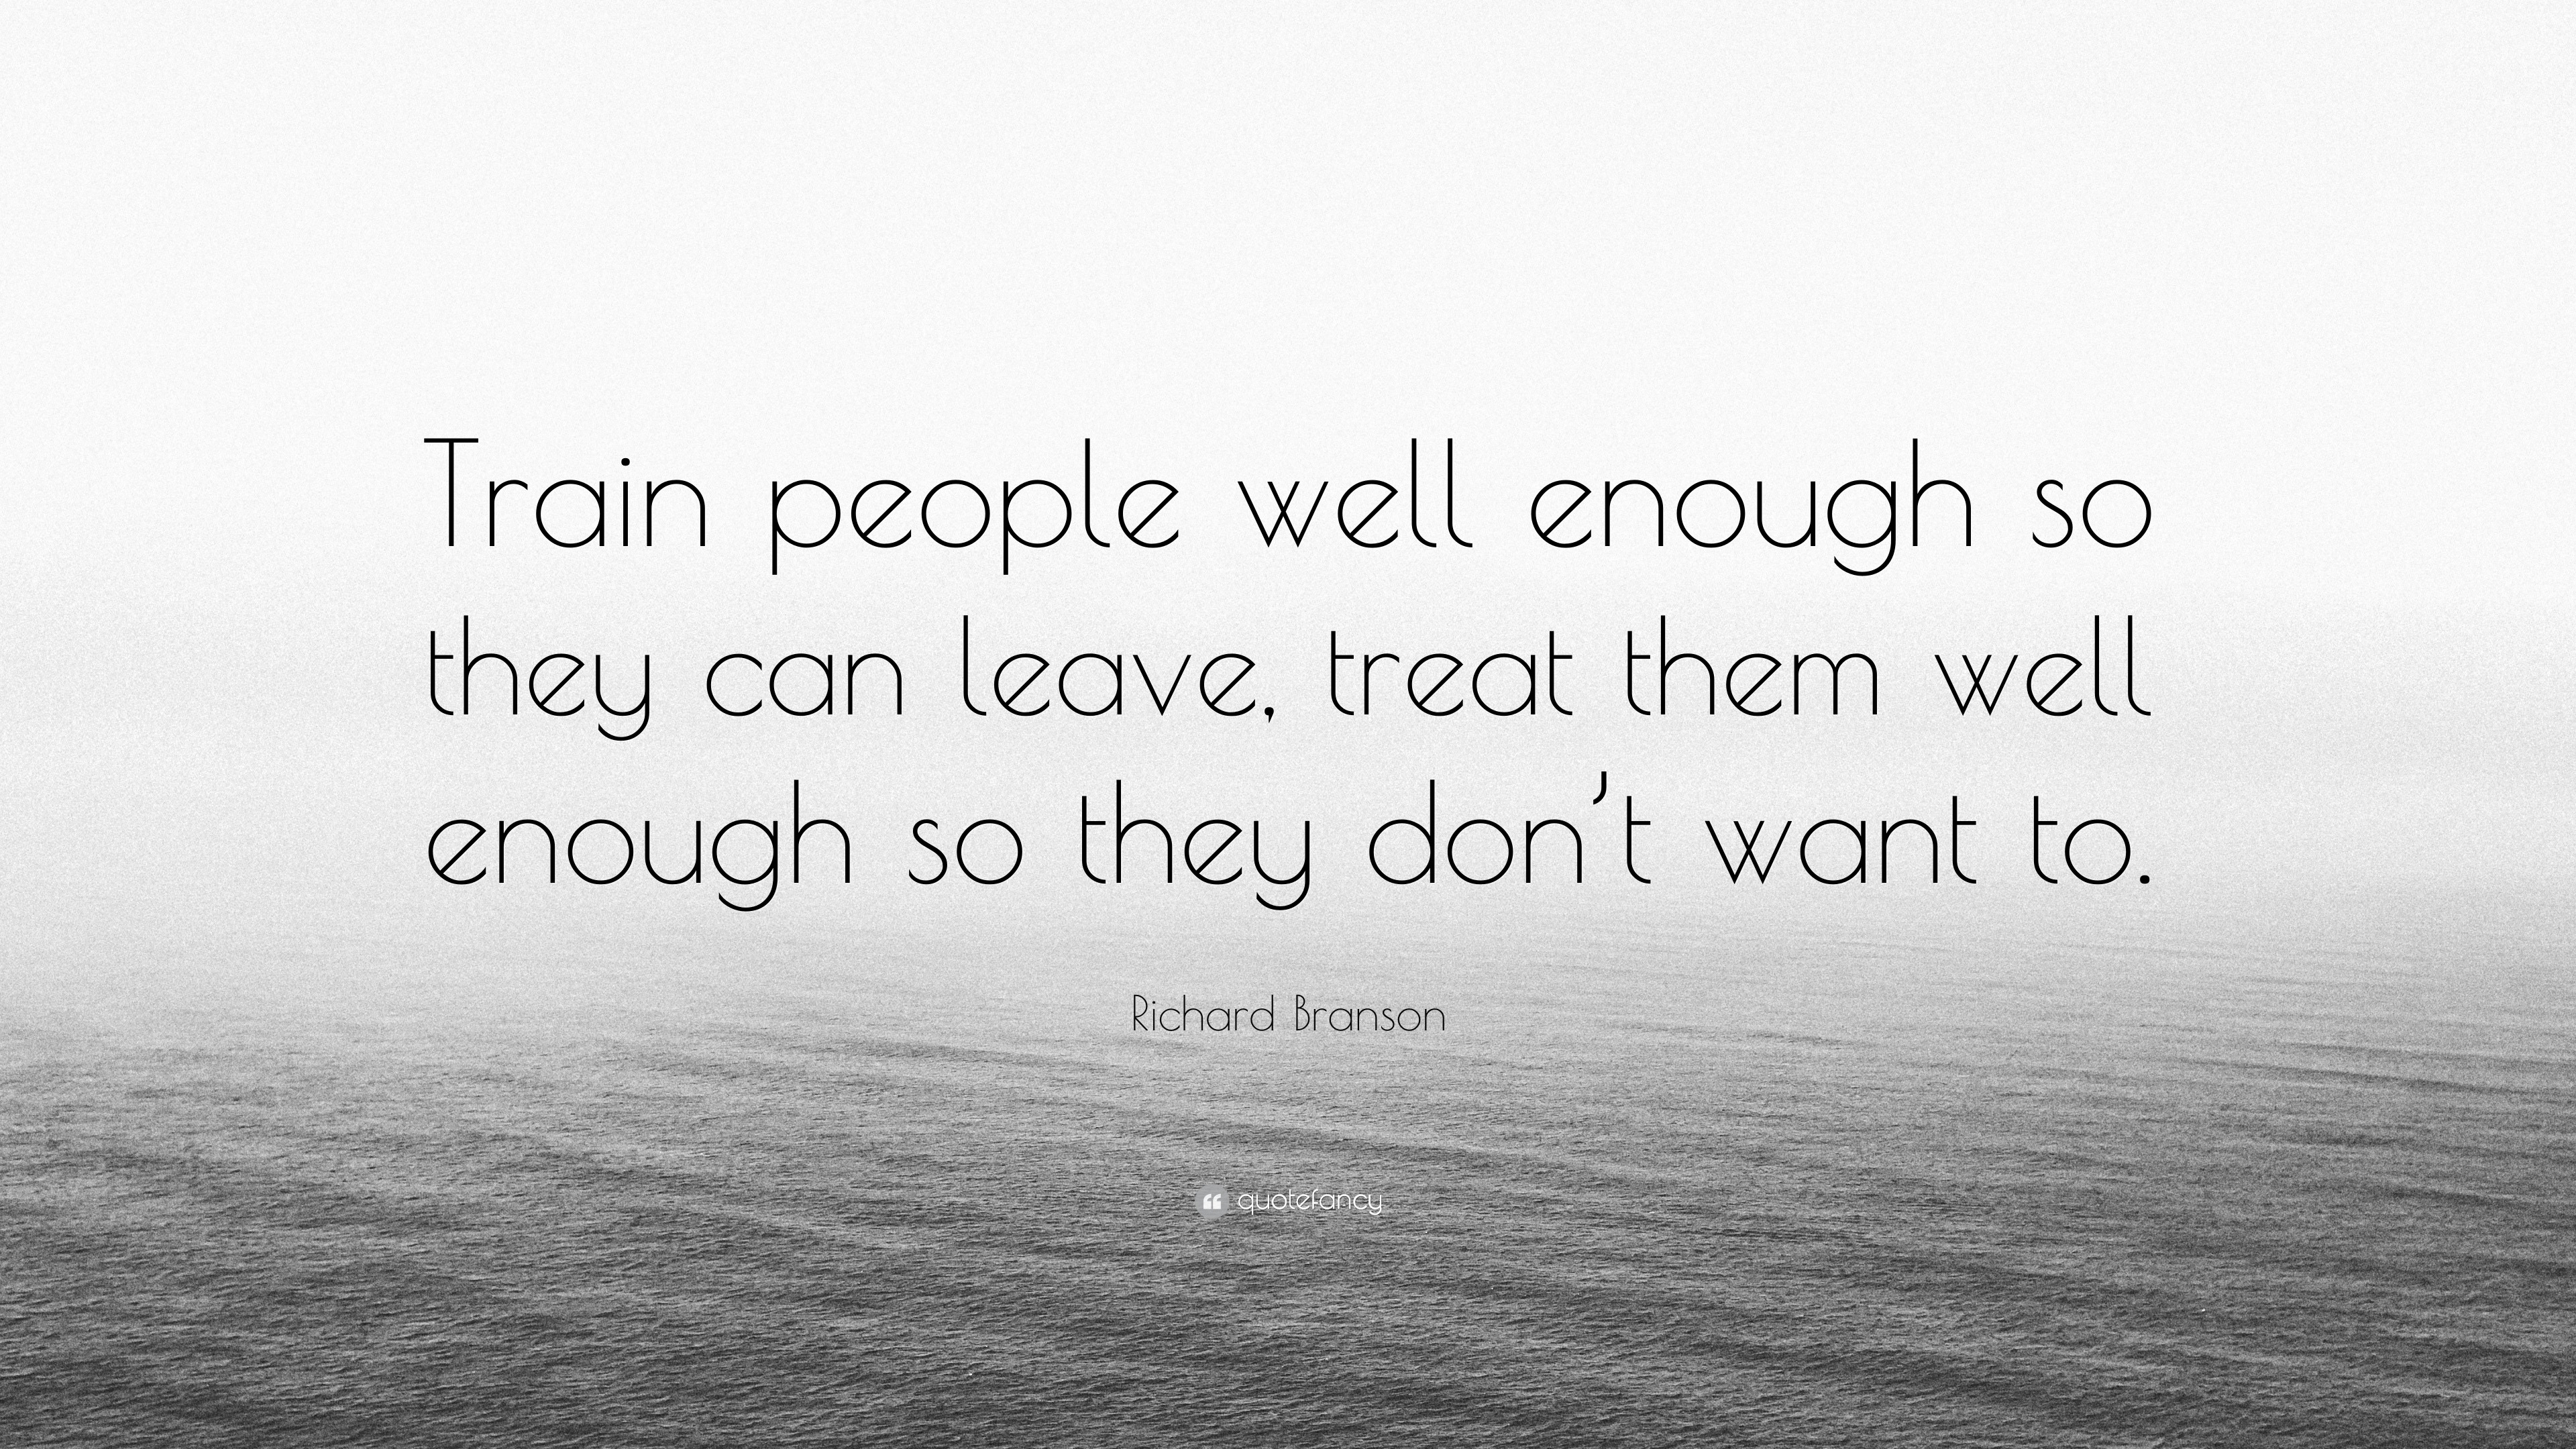 Richard Branson Quote: "Train people well enough so they ...